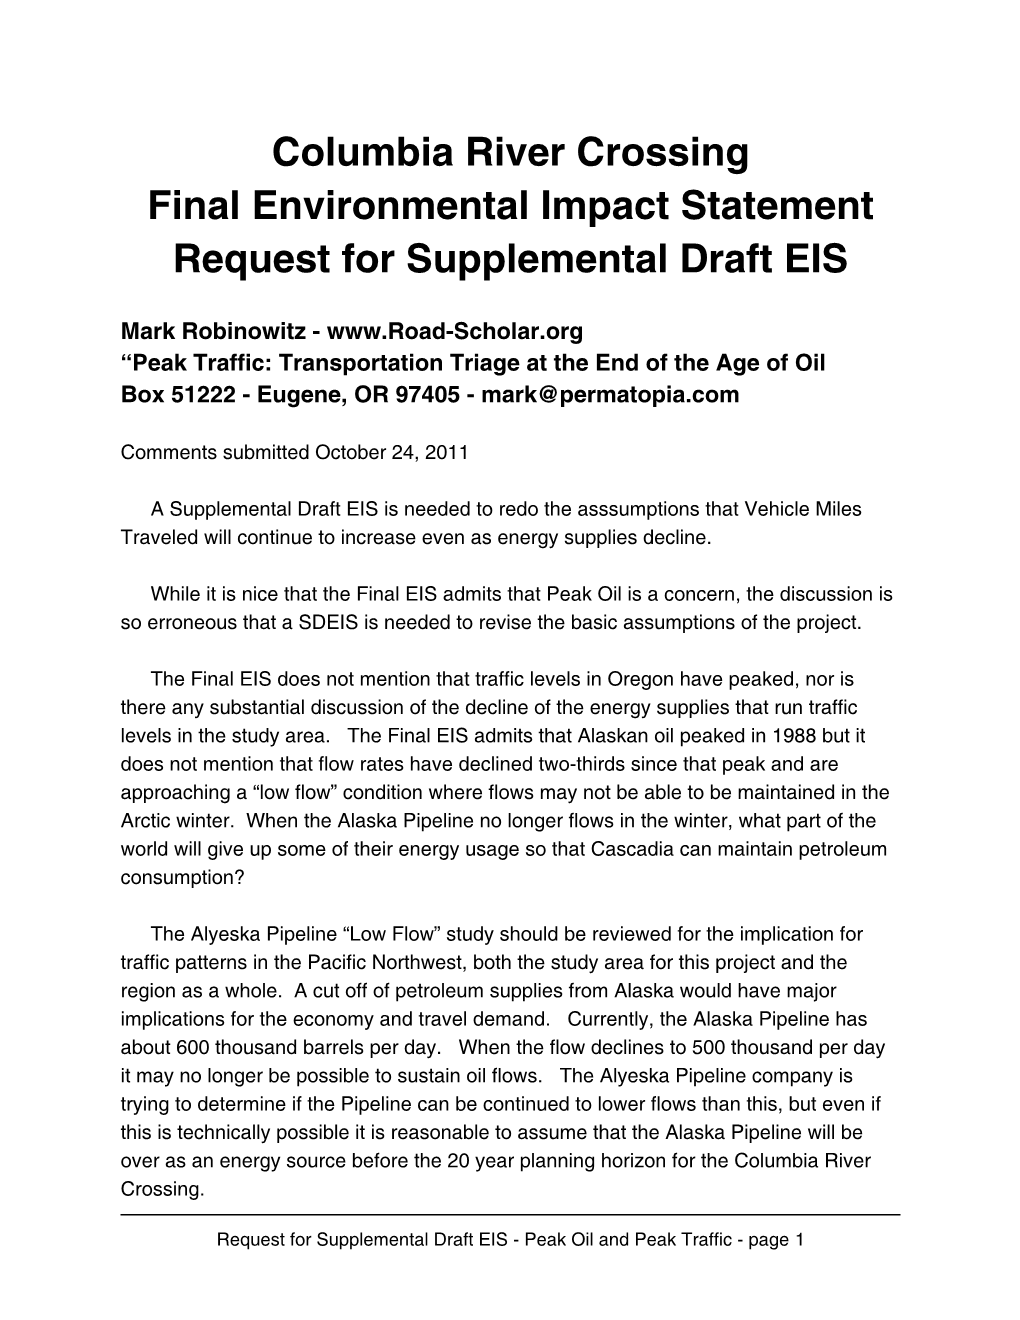 Columbia River Crossing Final Environmental Impact Statement Request for Supplemental Draft EIS